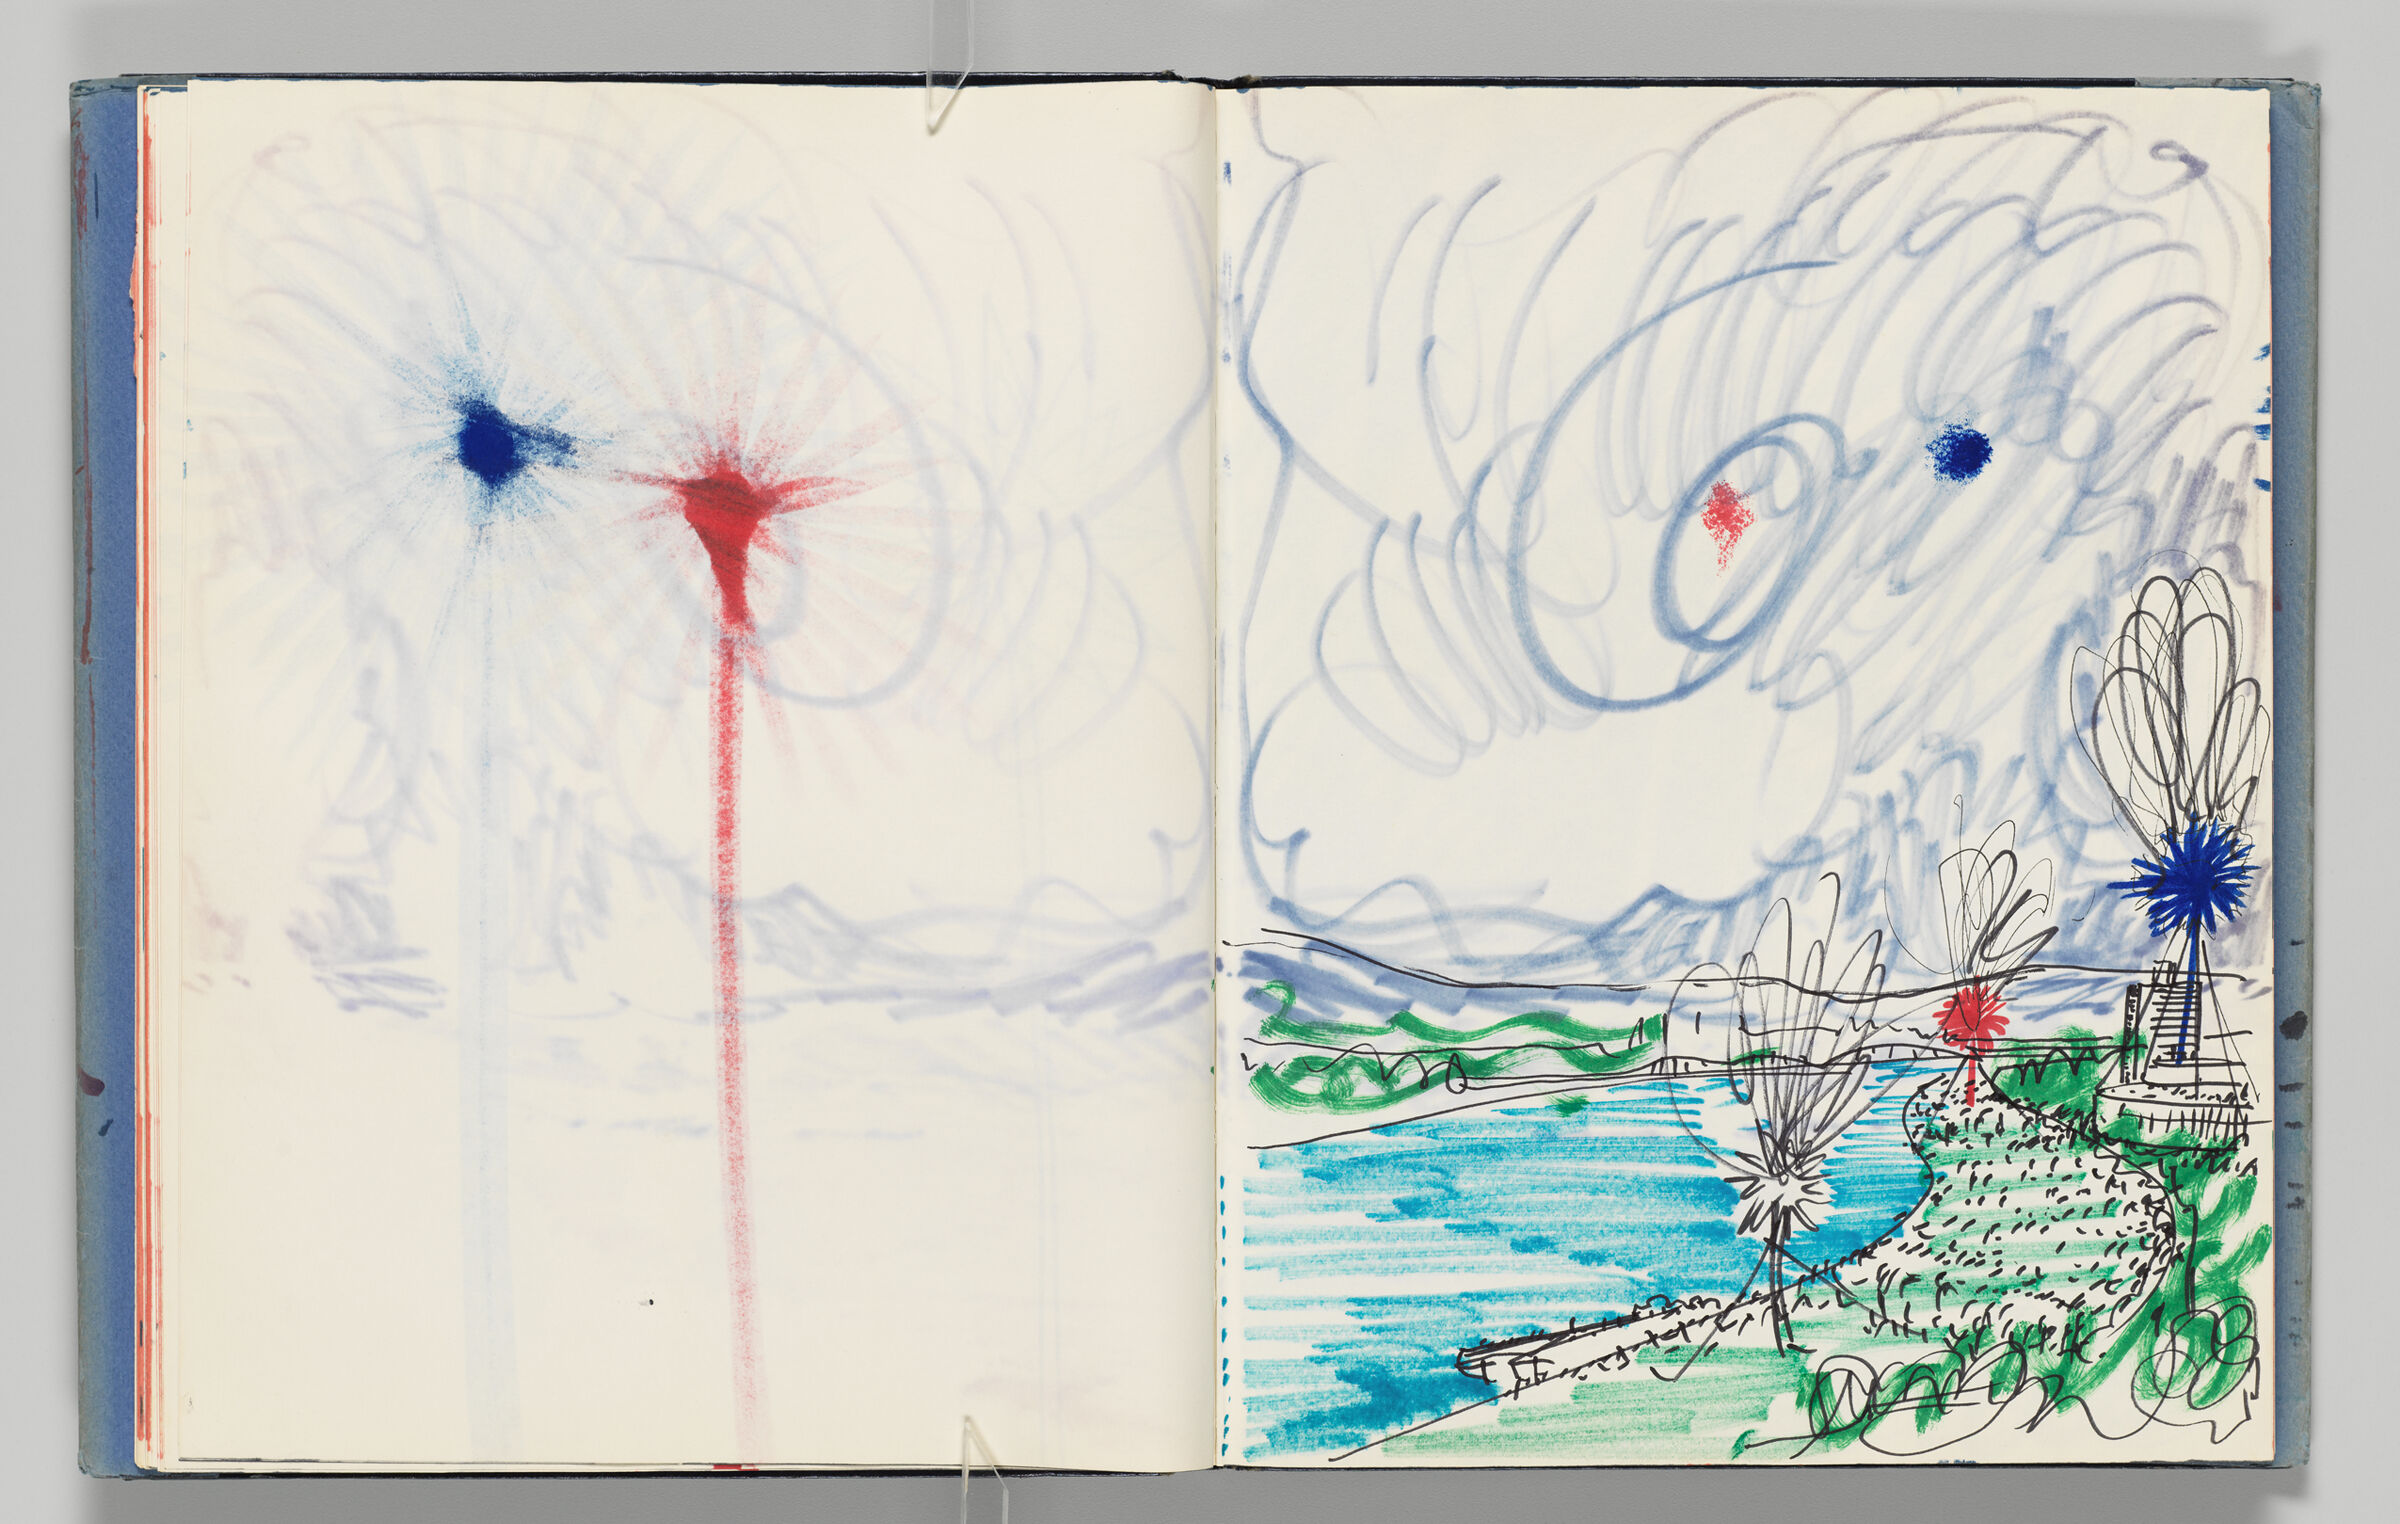 Untitled (Bleed-Through Of Previous Page With Marker Transfer, Left Page); Untitled (Designs For Sky Art In Linz, Right Page)